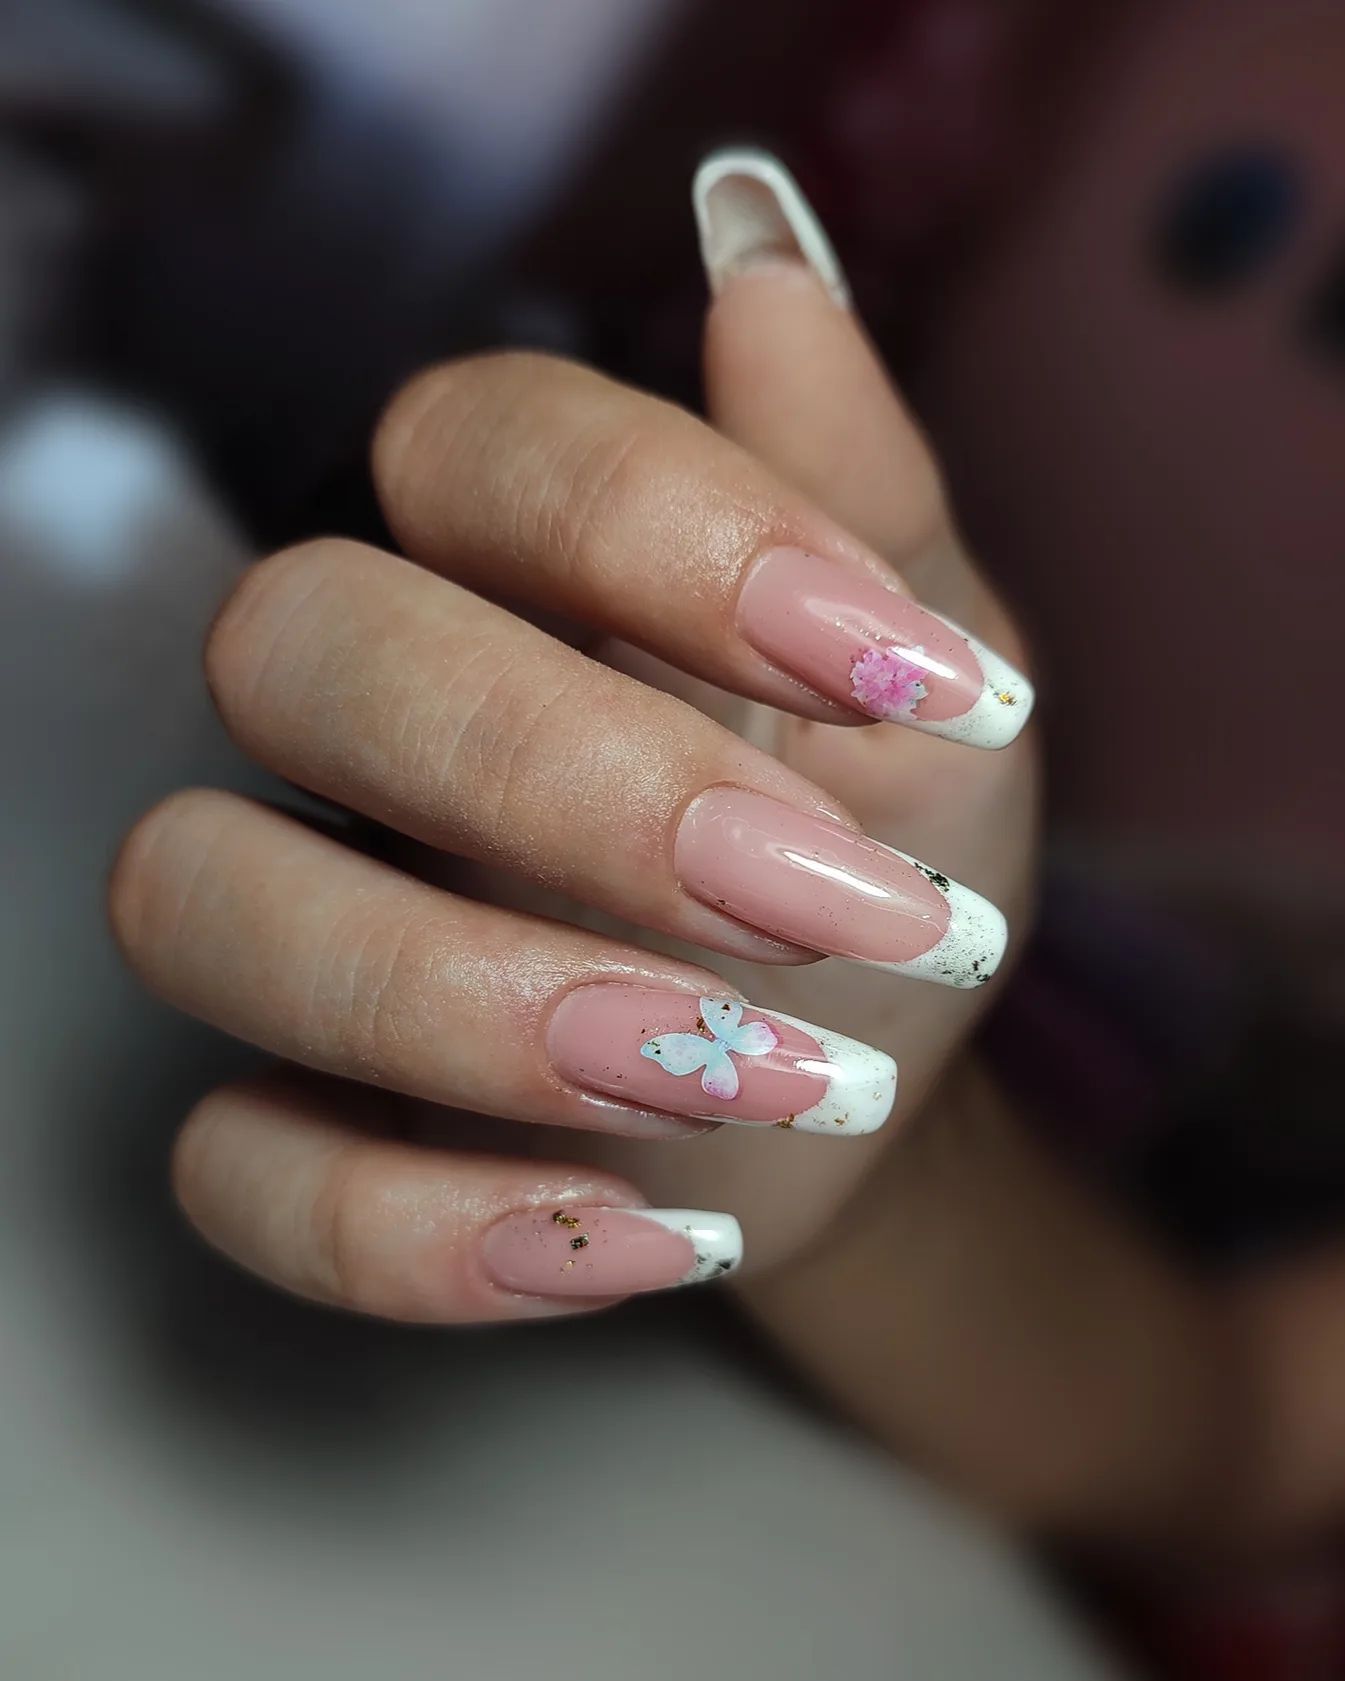 We all know that french manicures are so cool. There are some ways to make it more energetic like having a cute butterfly like the one above.